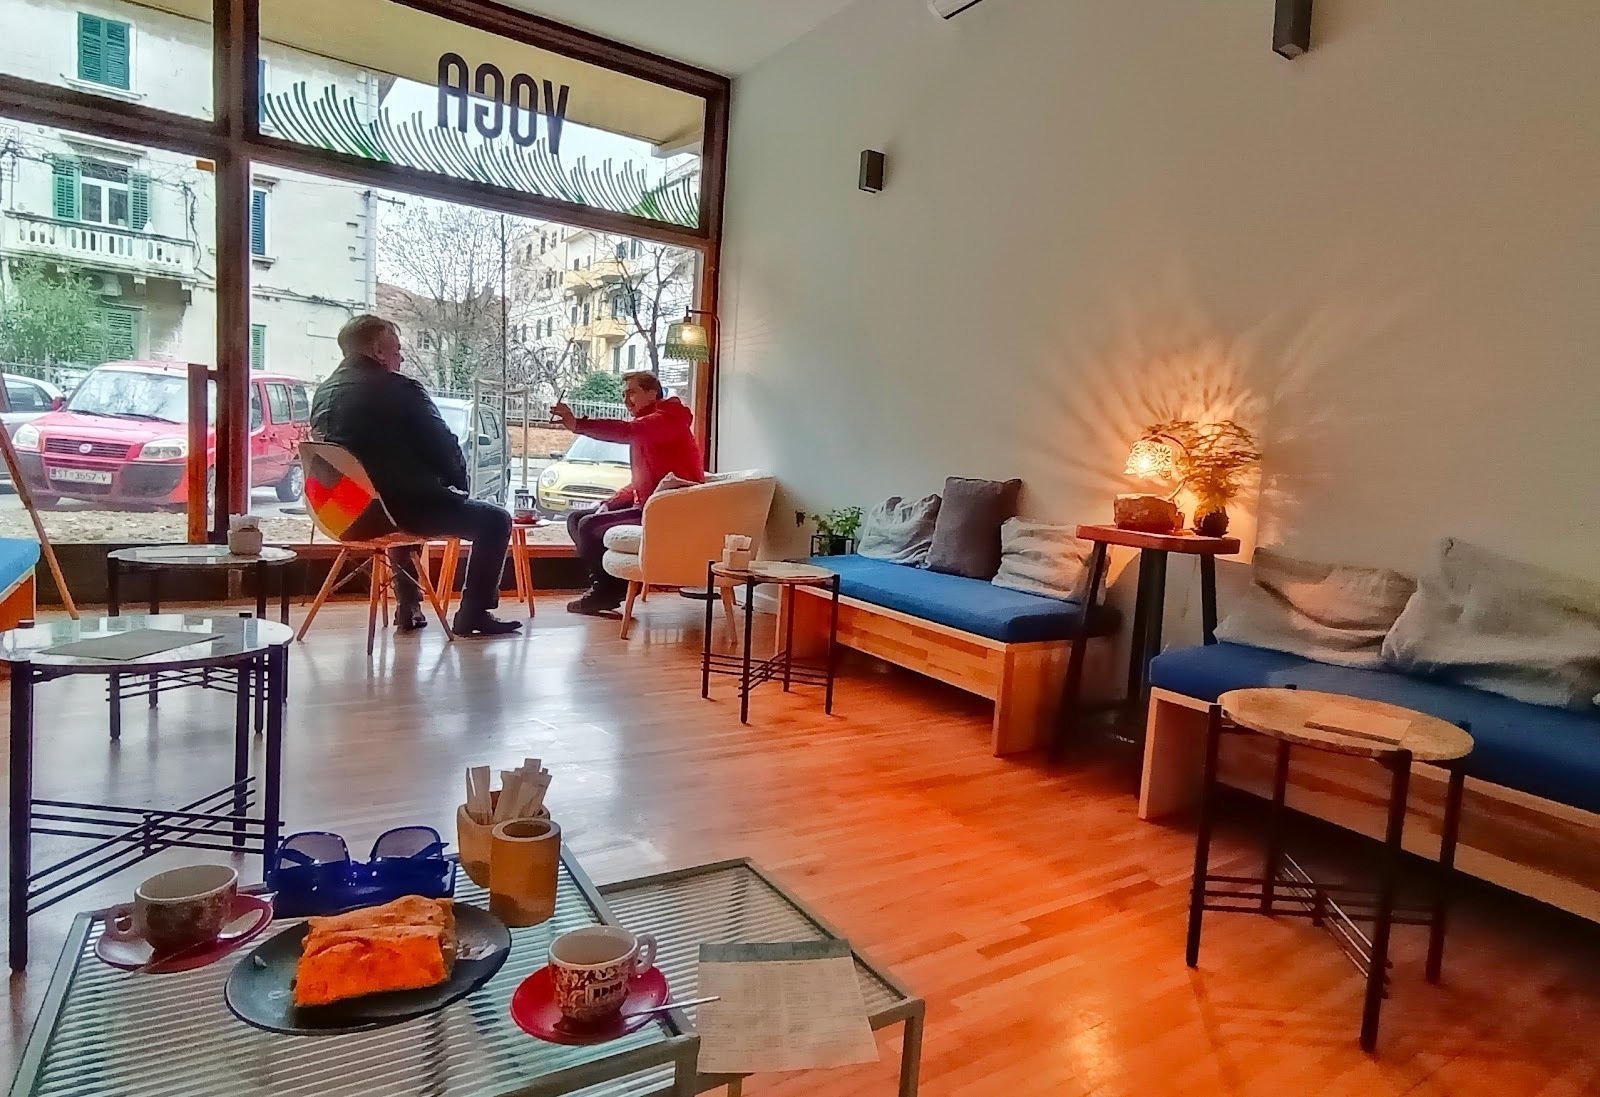 <span class="translation_missing" title="translation missing: en.meta.location_title, location_name: VOGA-Specialty Coffee Shop, city: Split">Location Title</span>